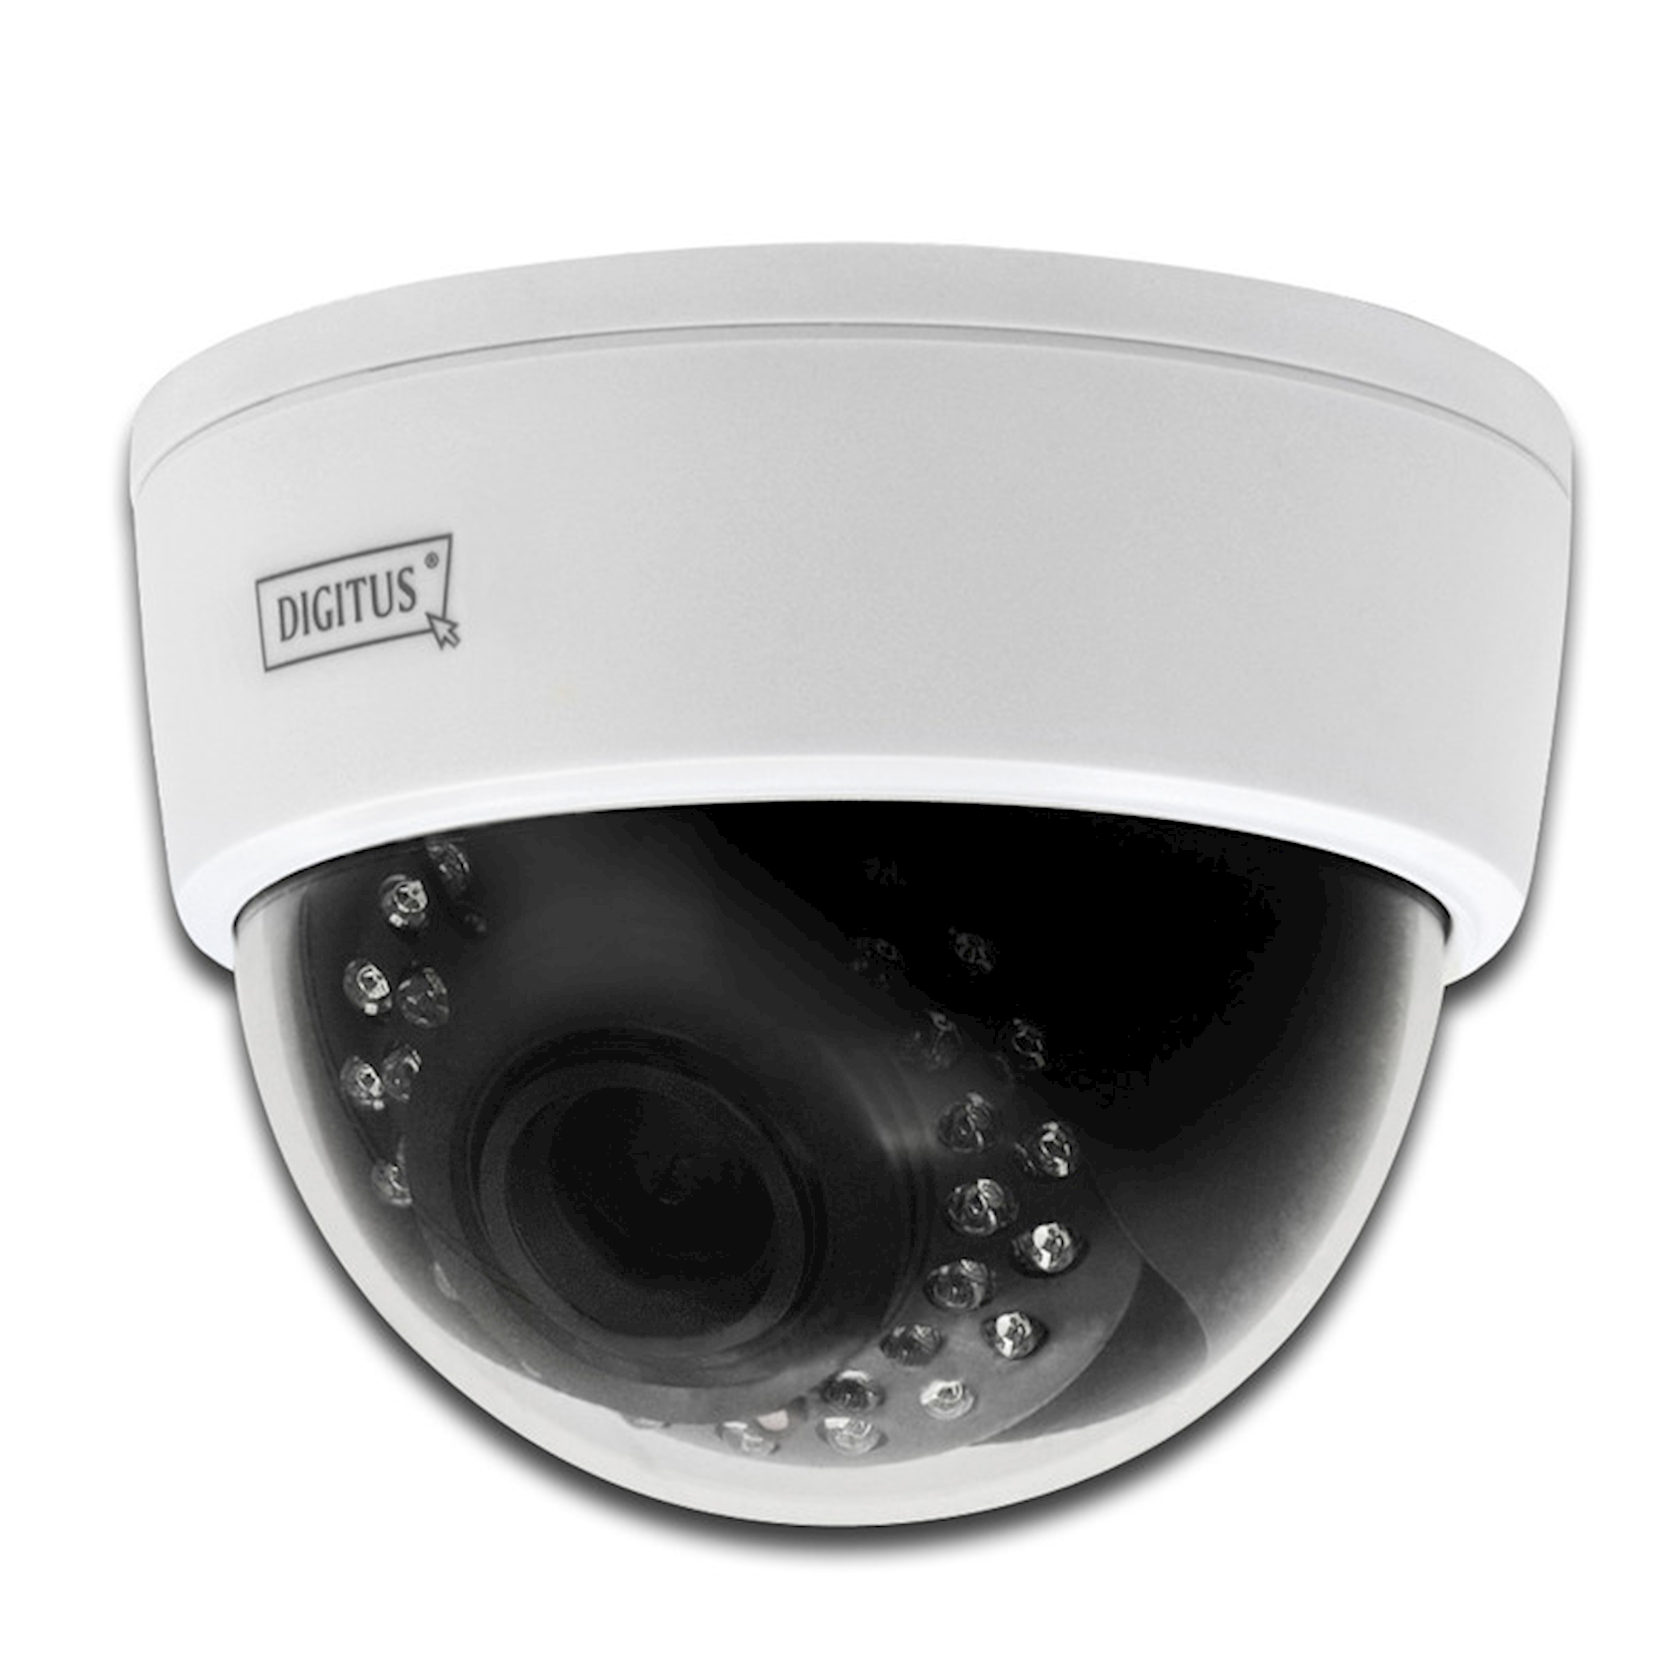 Audio, Video, security camera and Central Television Systems